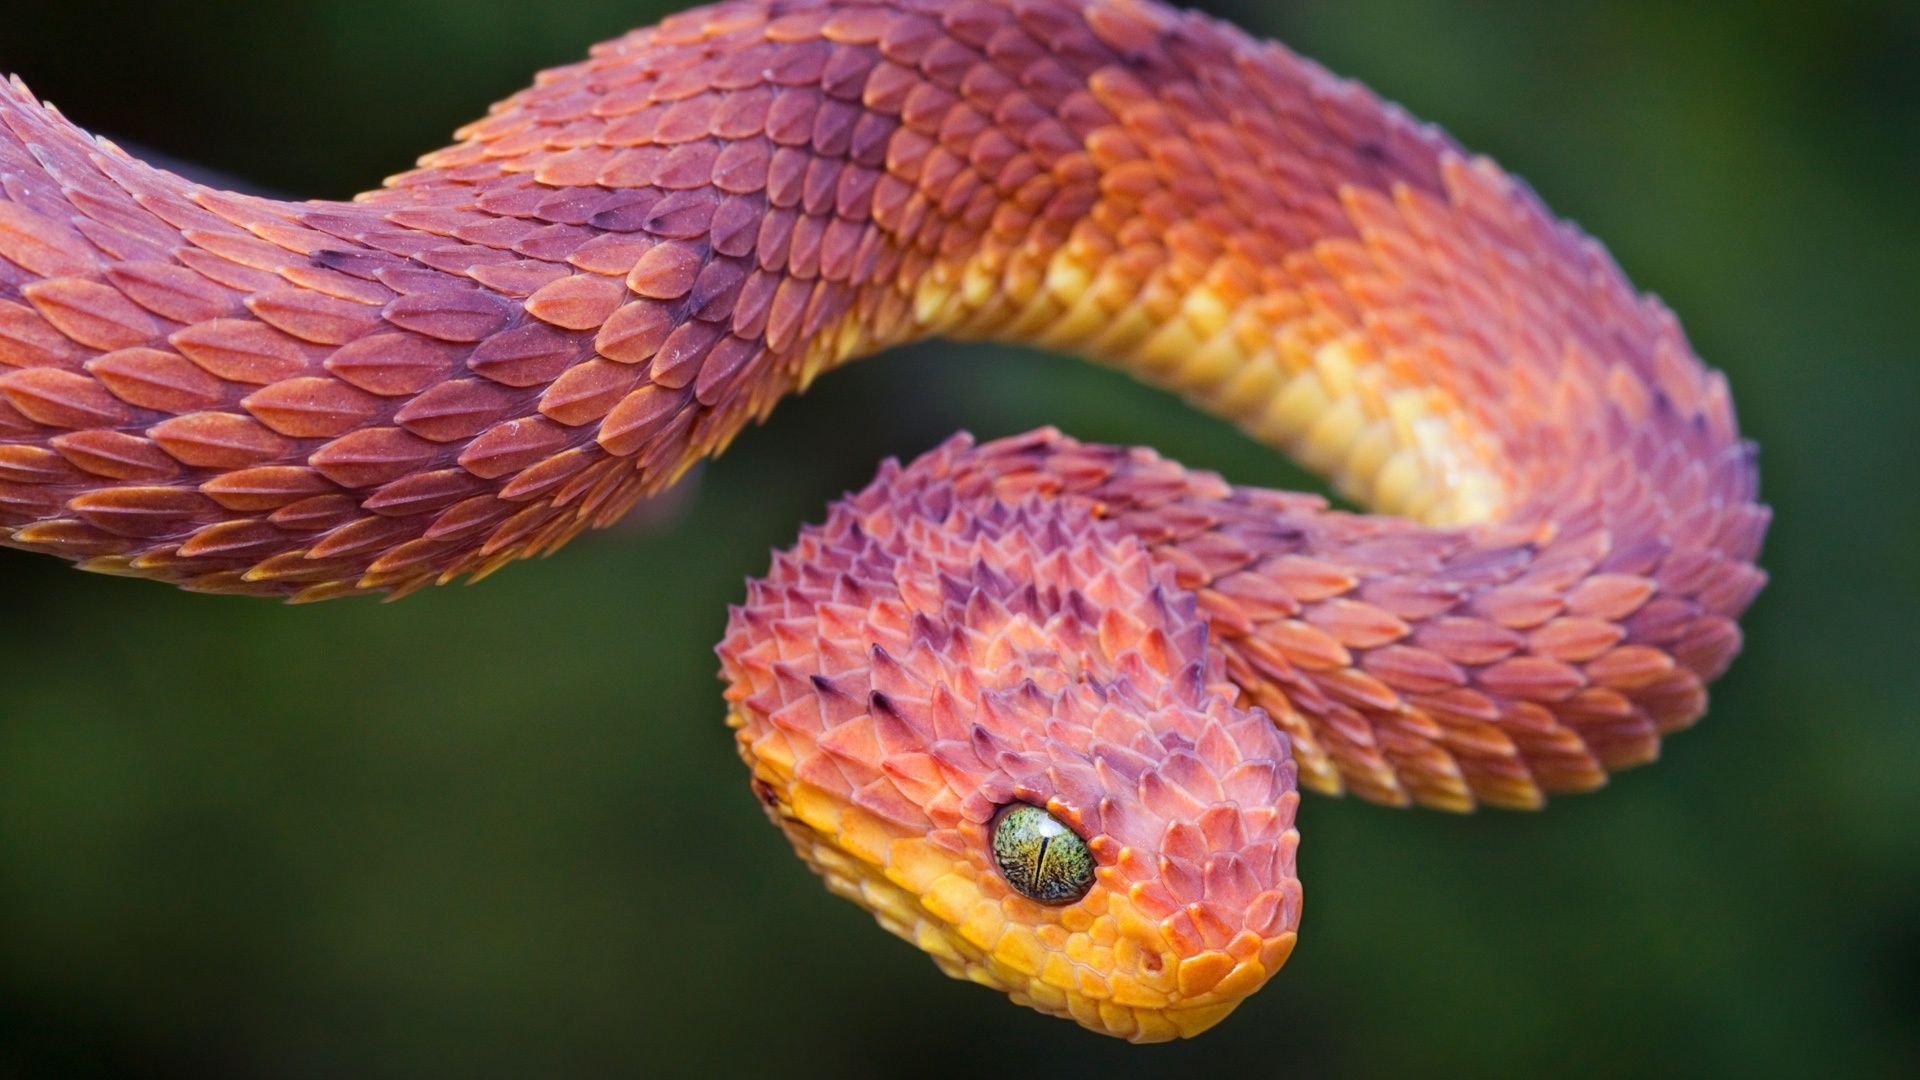 this one is cute | bush vipers | Pinterest | Viper